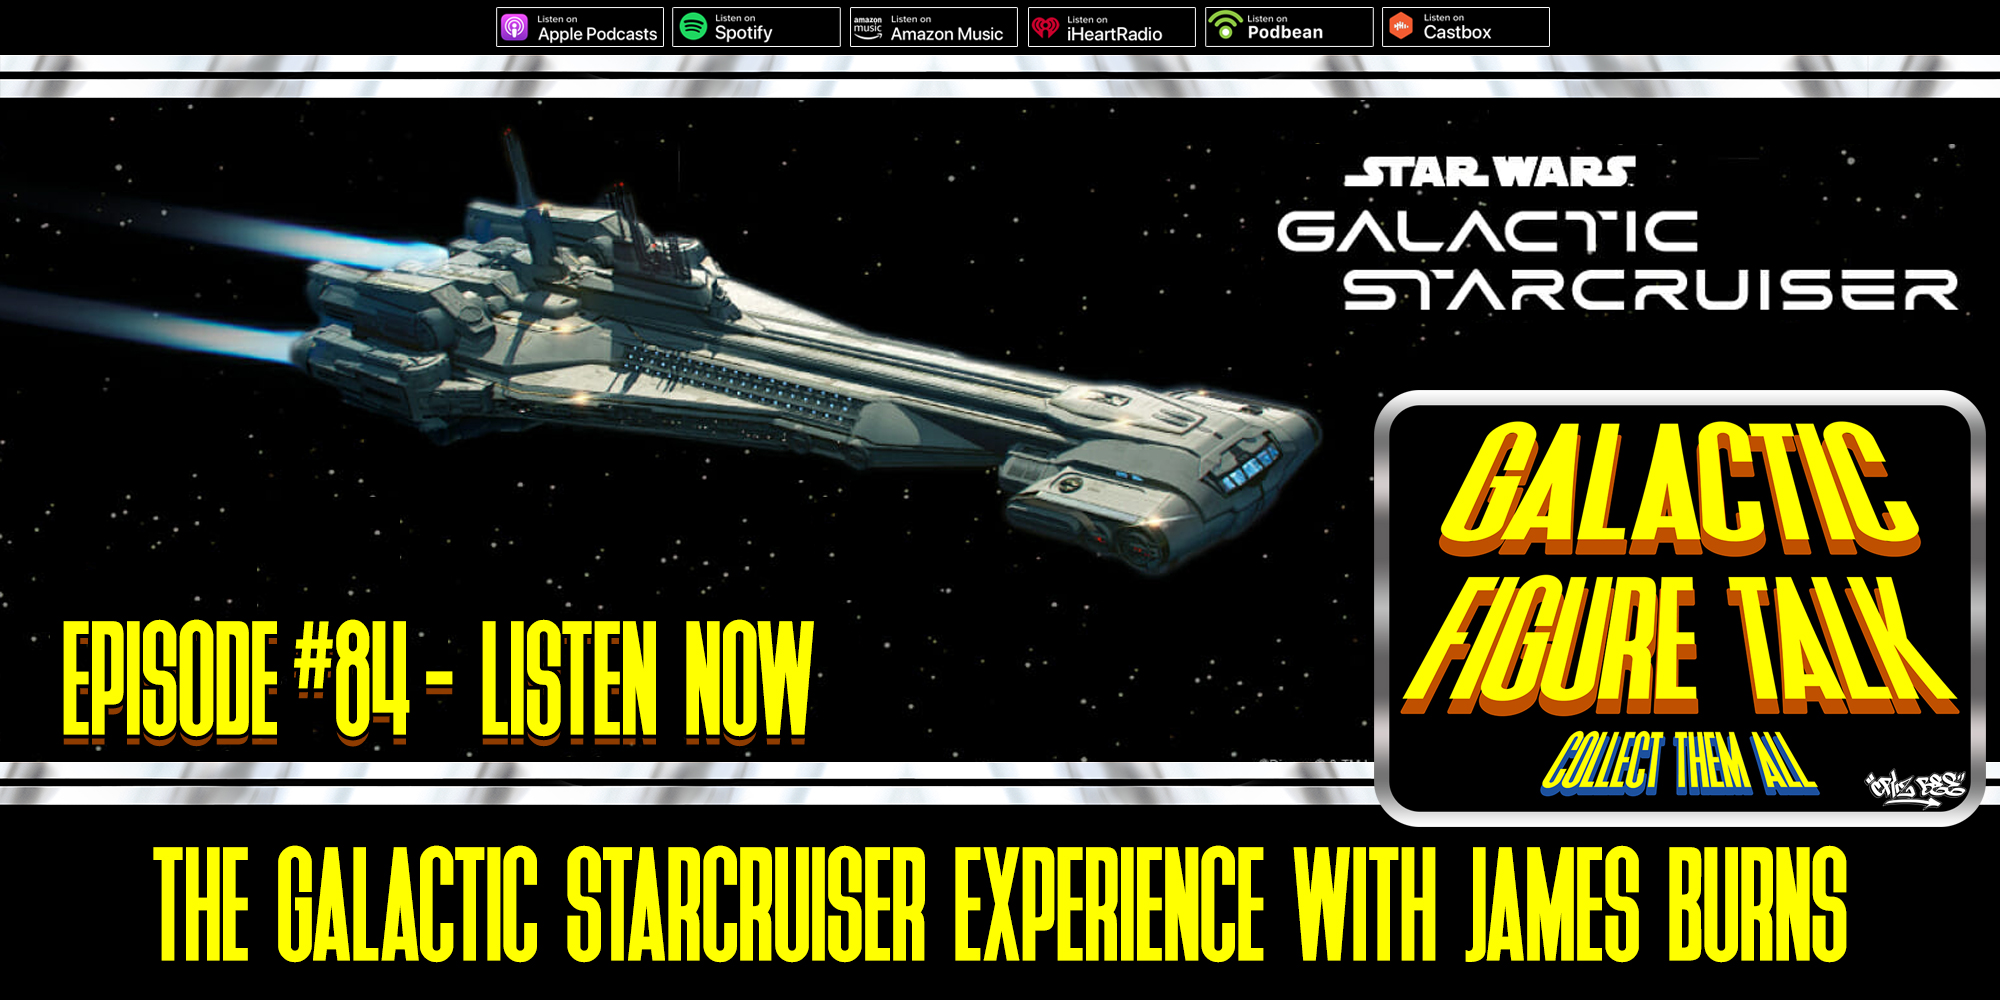 GFT - The Star Wars Galactic Starcruiser Experience With James Burns